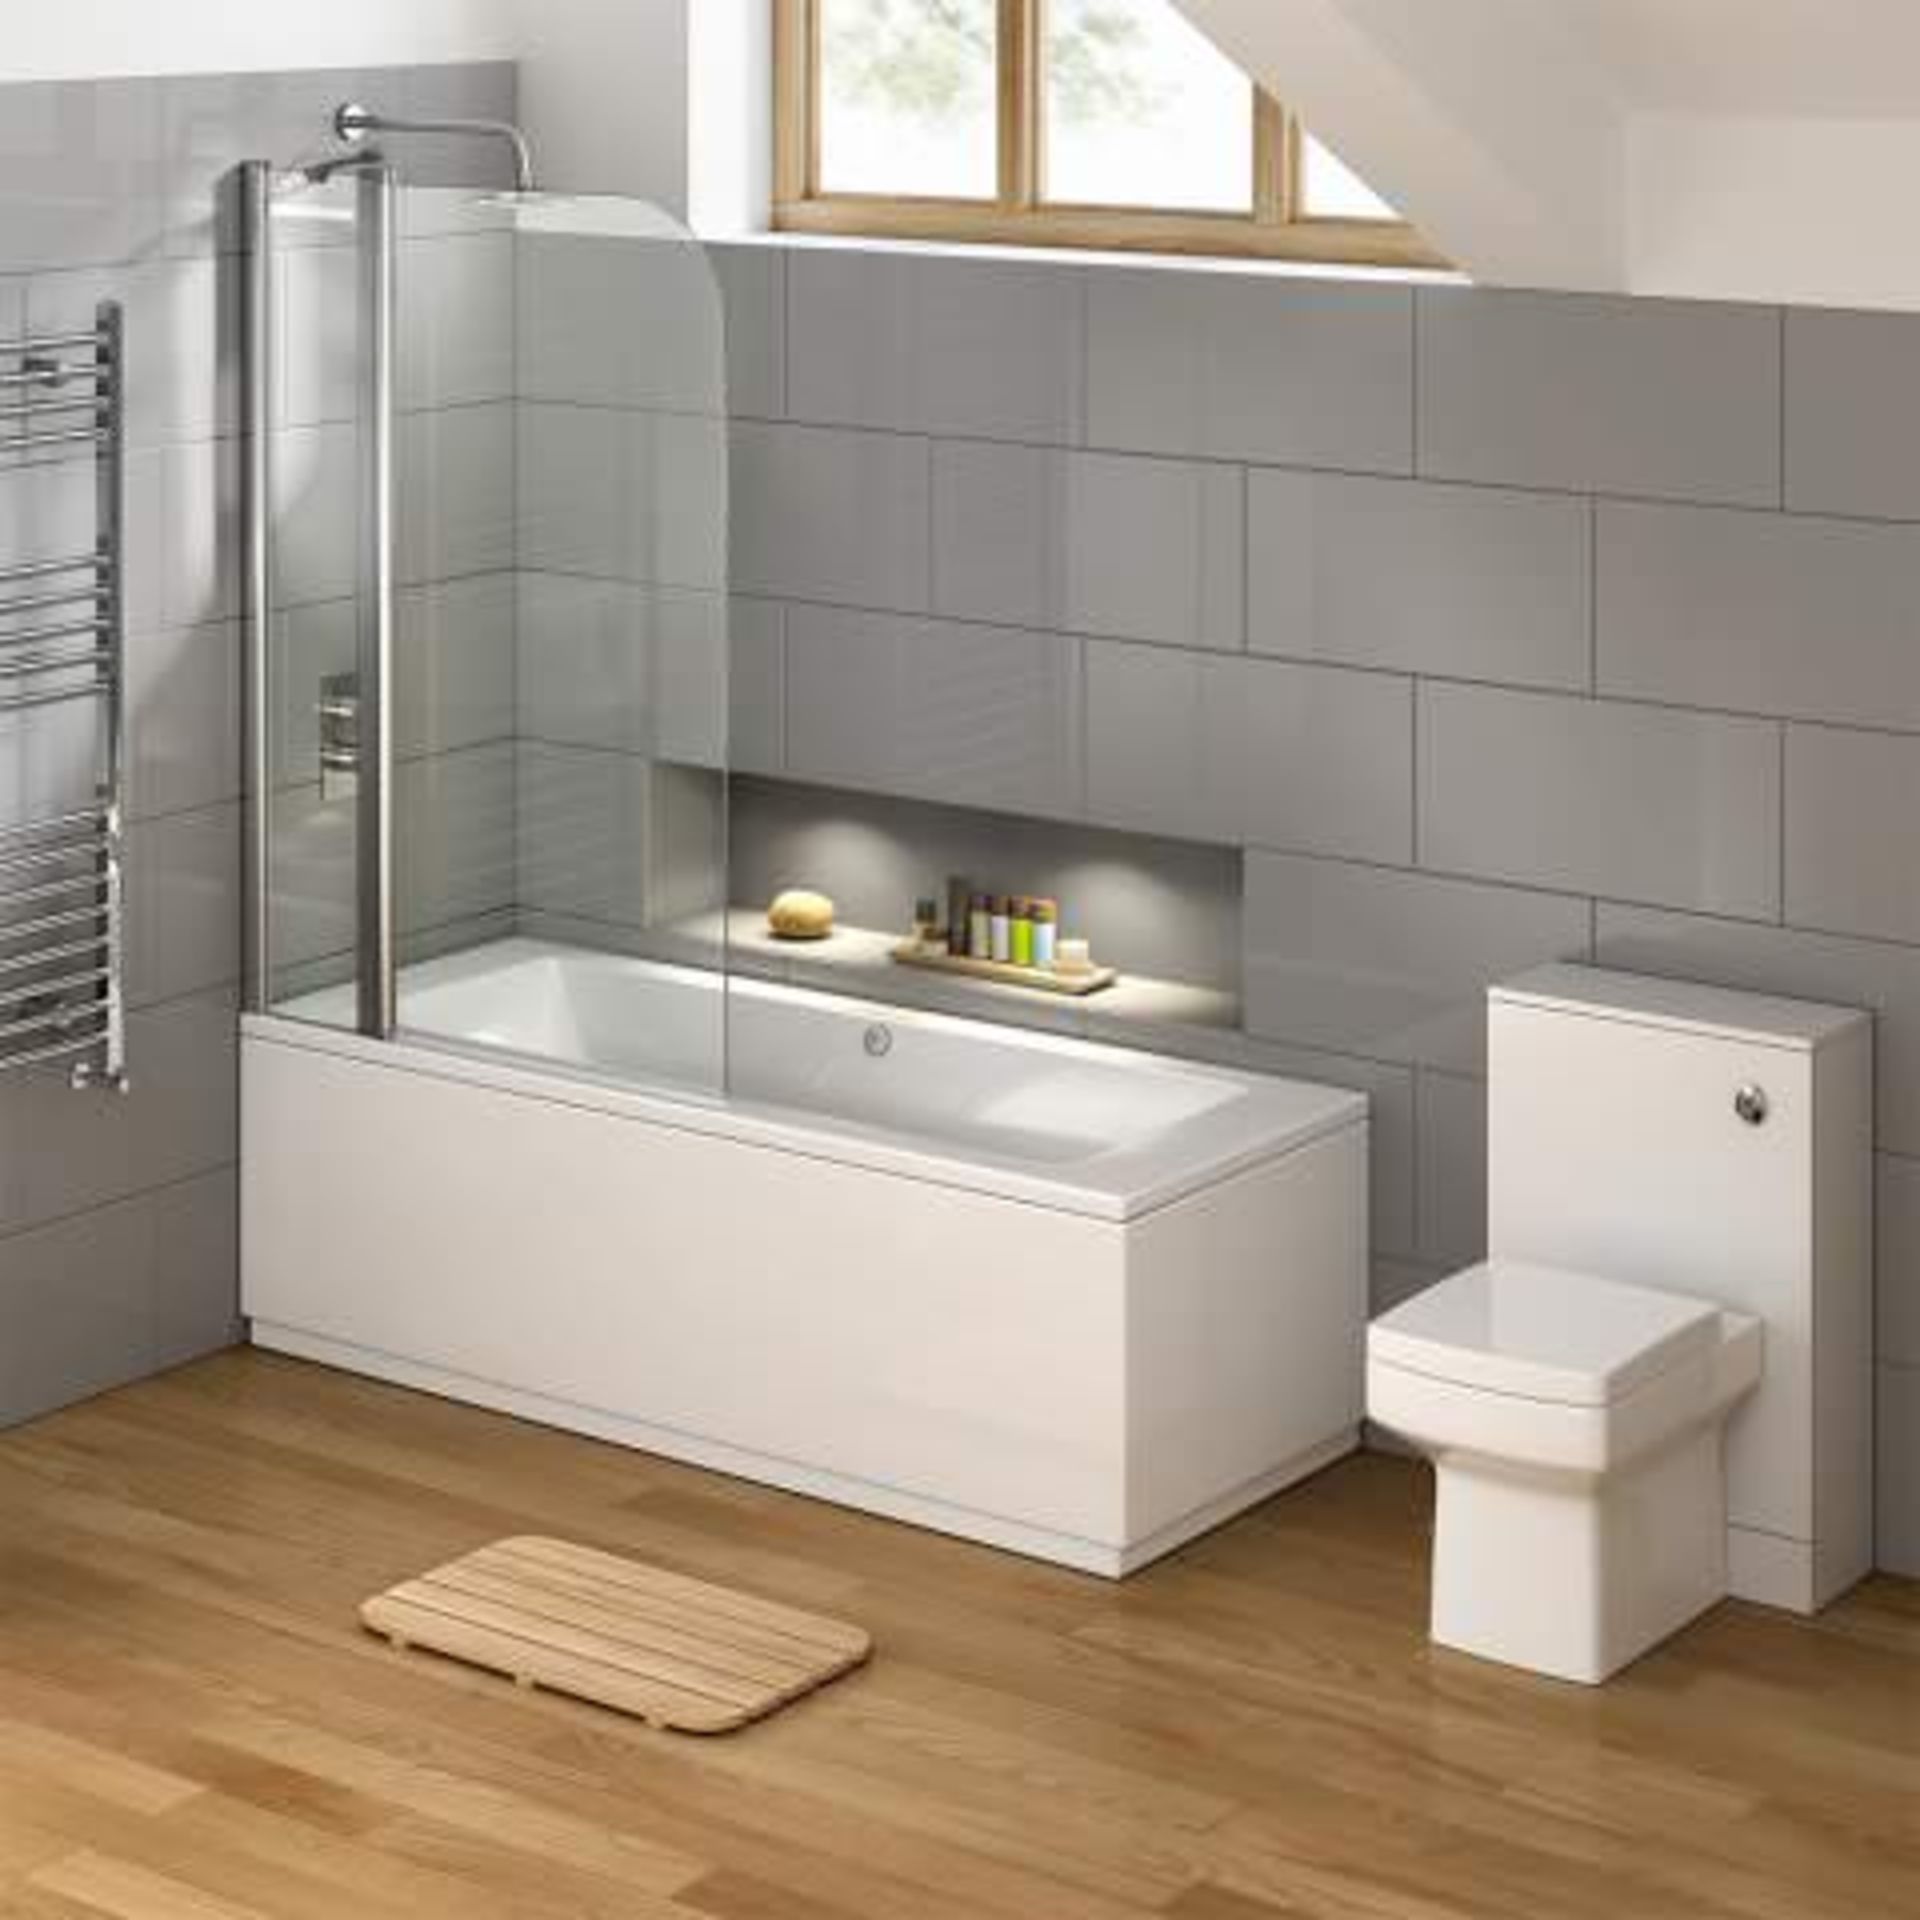 (H132) 1000mm - 6mm - EasyClean Straight Bath Screen. RRP £224.99. The clue is in the name: Easy - Bild 3 aus 4